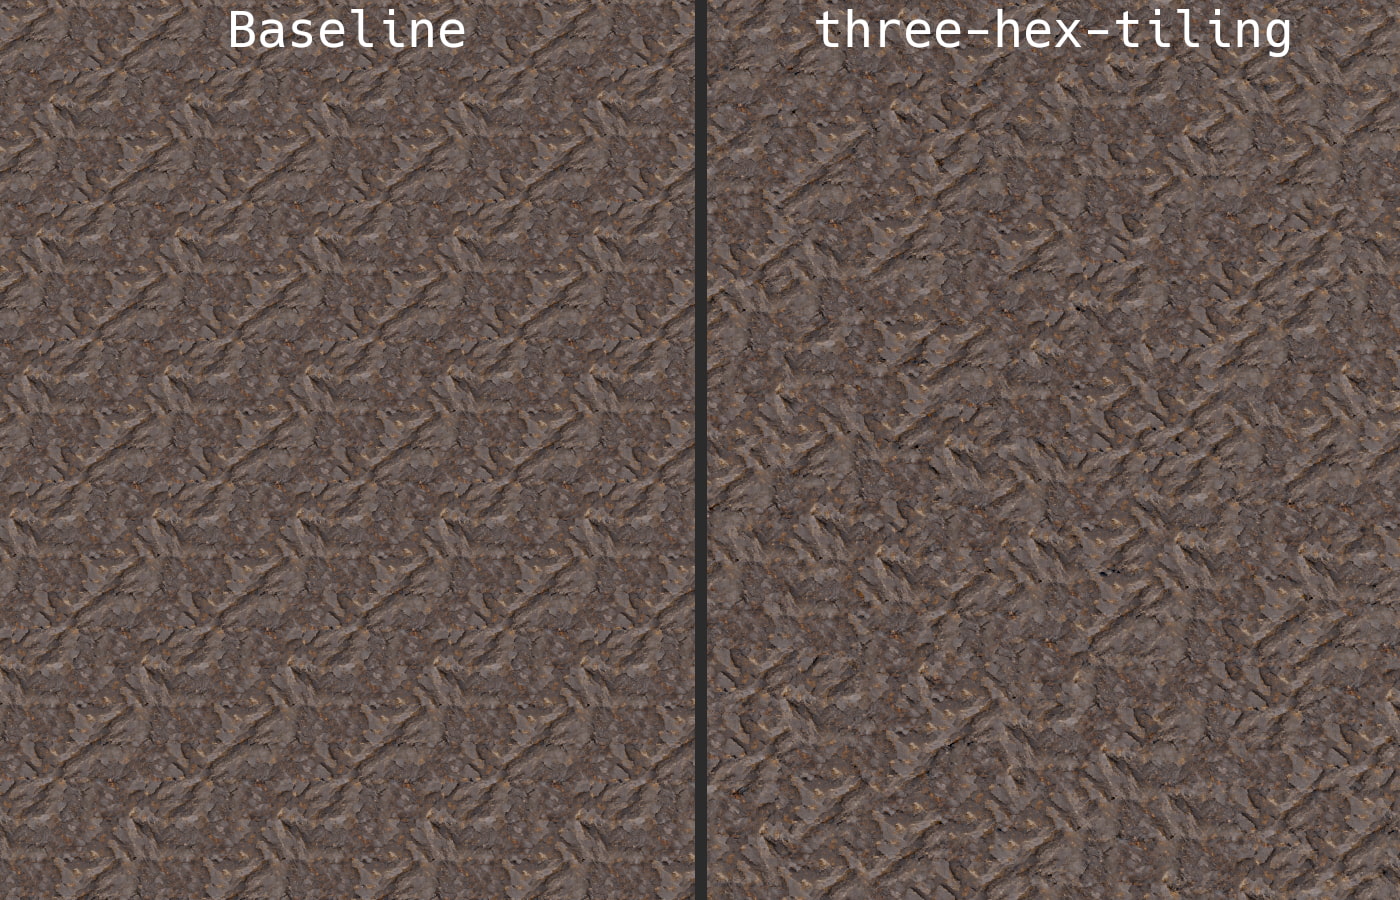 Screenshot showing comparison between a repeating seamless rock texture with and without three-hex-tiling.  The image is divided in half horizontally by a gray bar.  The left side is labeled "baseline" and shows a gray rock-like texture that clearly repeats, resulting in an artifical grid-like pattern.  The right side has the same rock texture but without any visible tiling and is labeled three-hex-tiling.